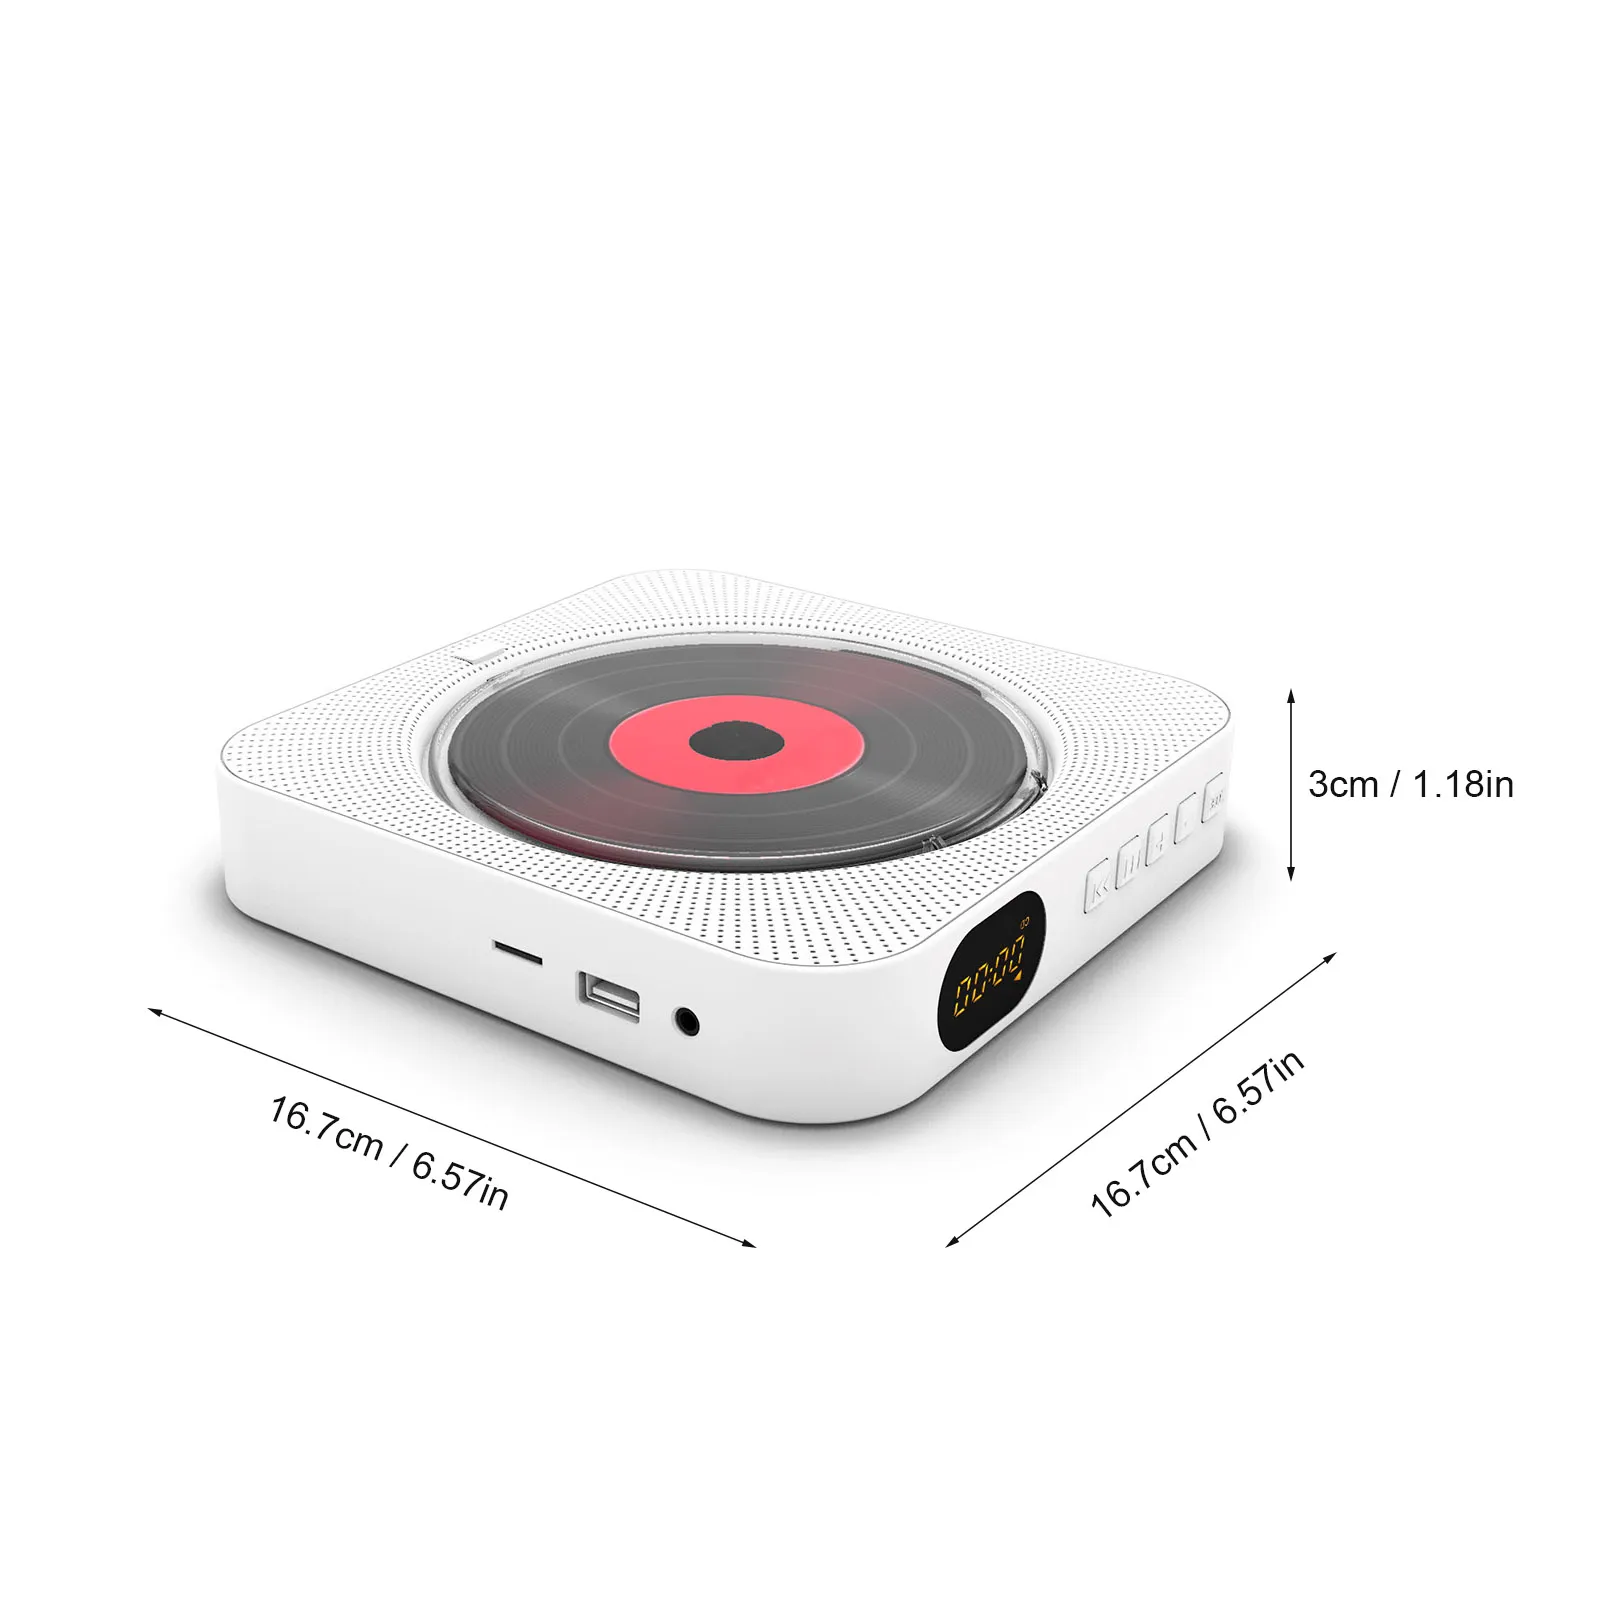 CD Player Portable, FM Radio with Dual Stereo Sound System, Rechargeable  Bluetooth Boombox with Remote Control, Playback CD/CD-R/CD-RW/MP3, Support